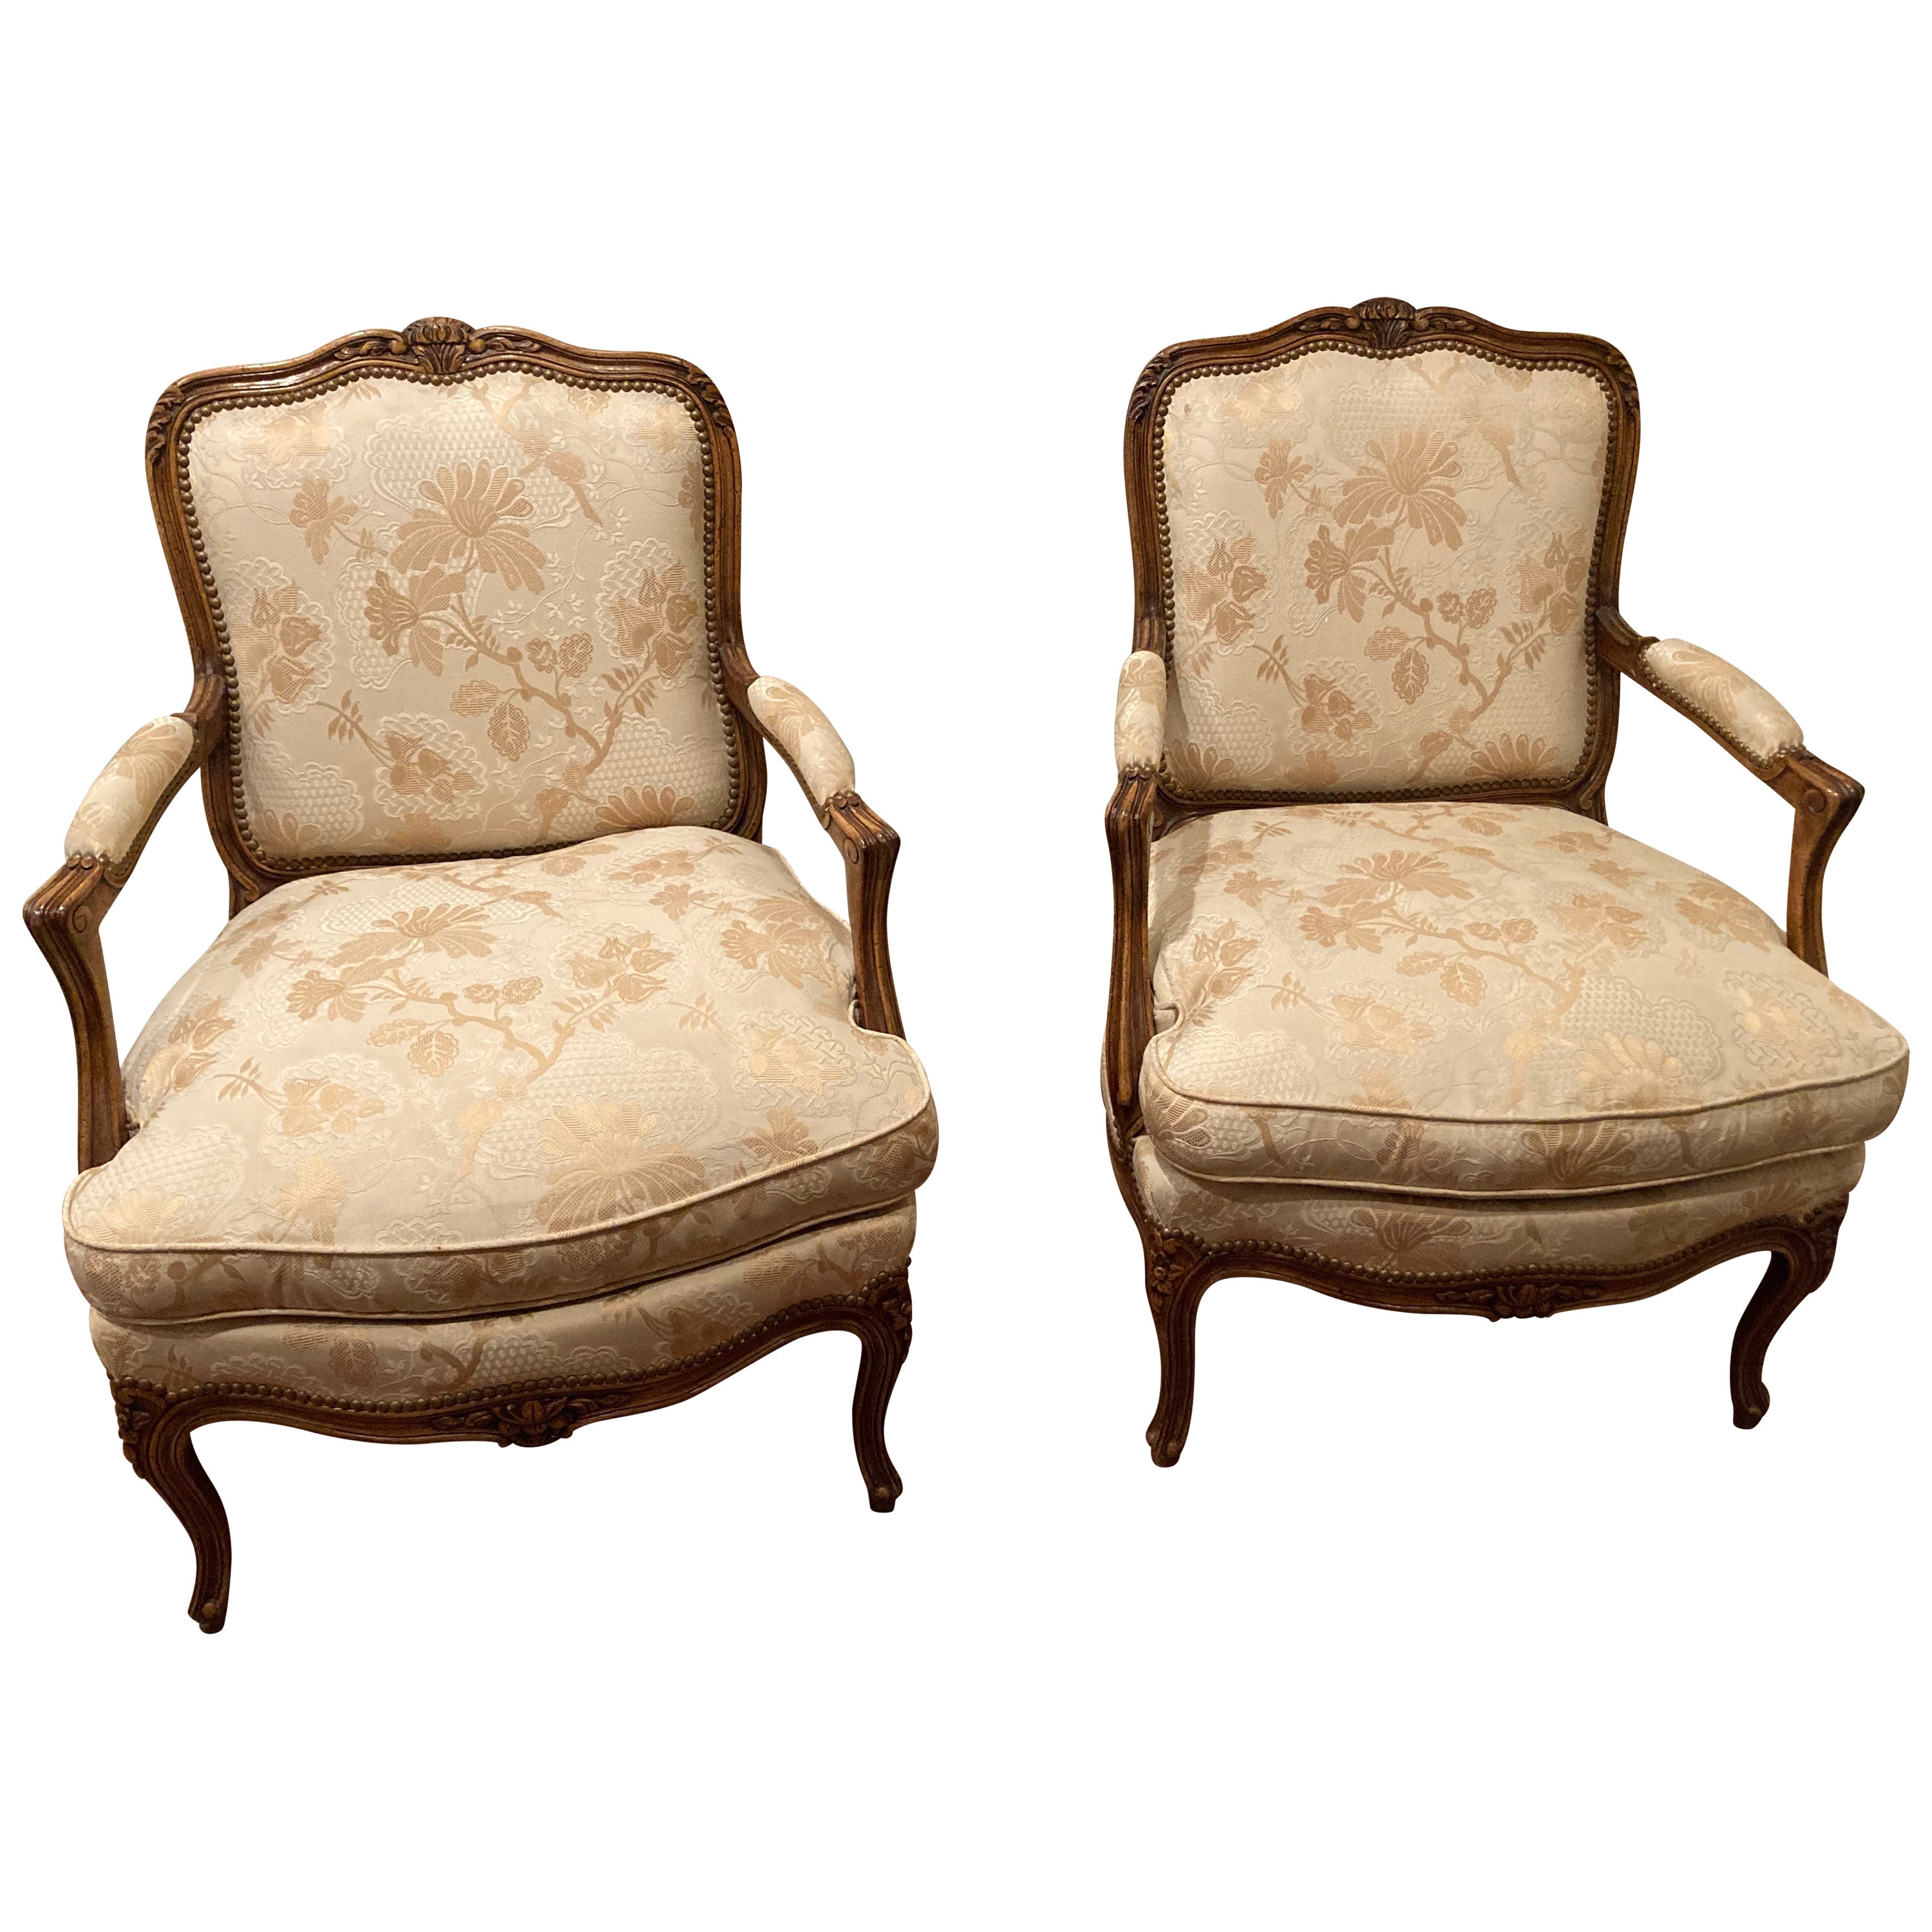 Magnificent Pair of French Balzarotti Louis XVI Style Bergere Armchairs